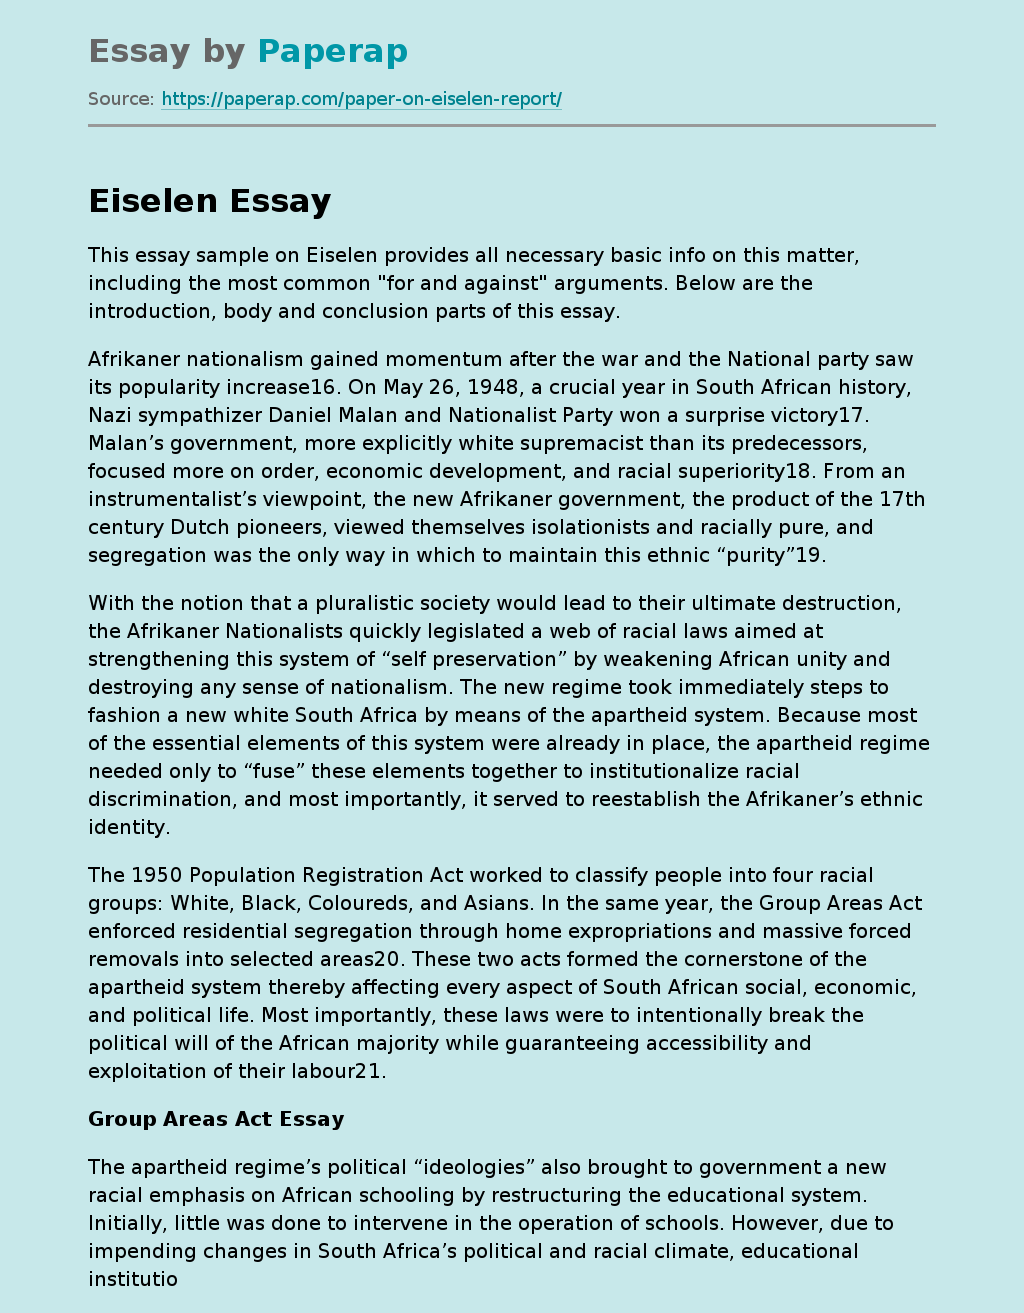 Eiselen: Basic Info and Arguments